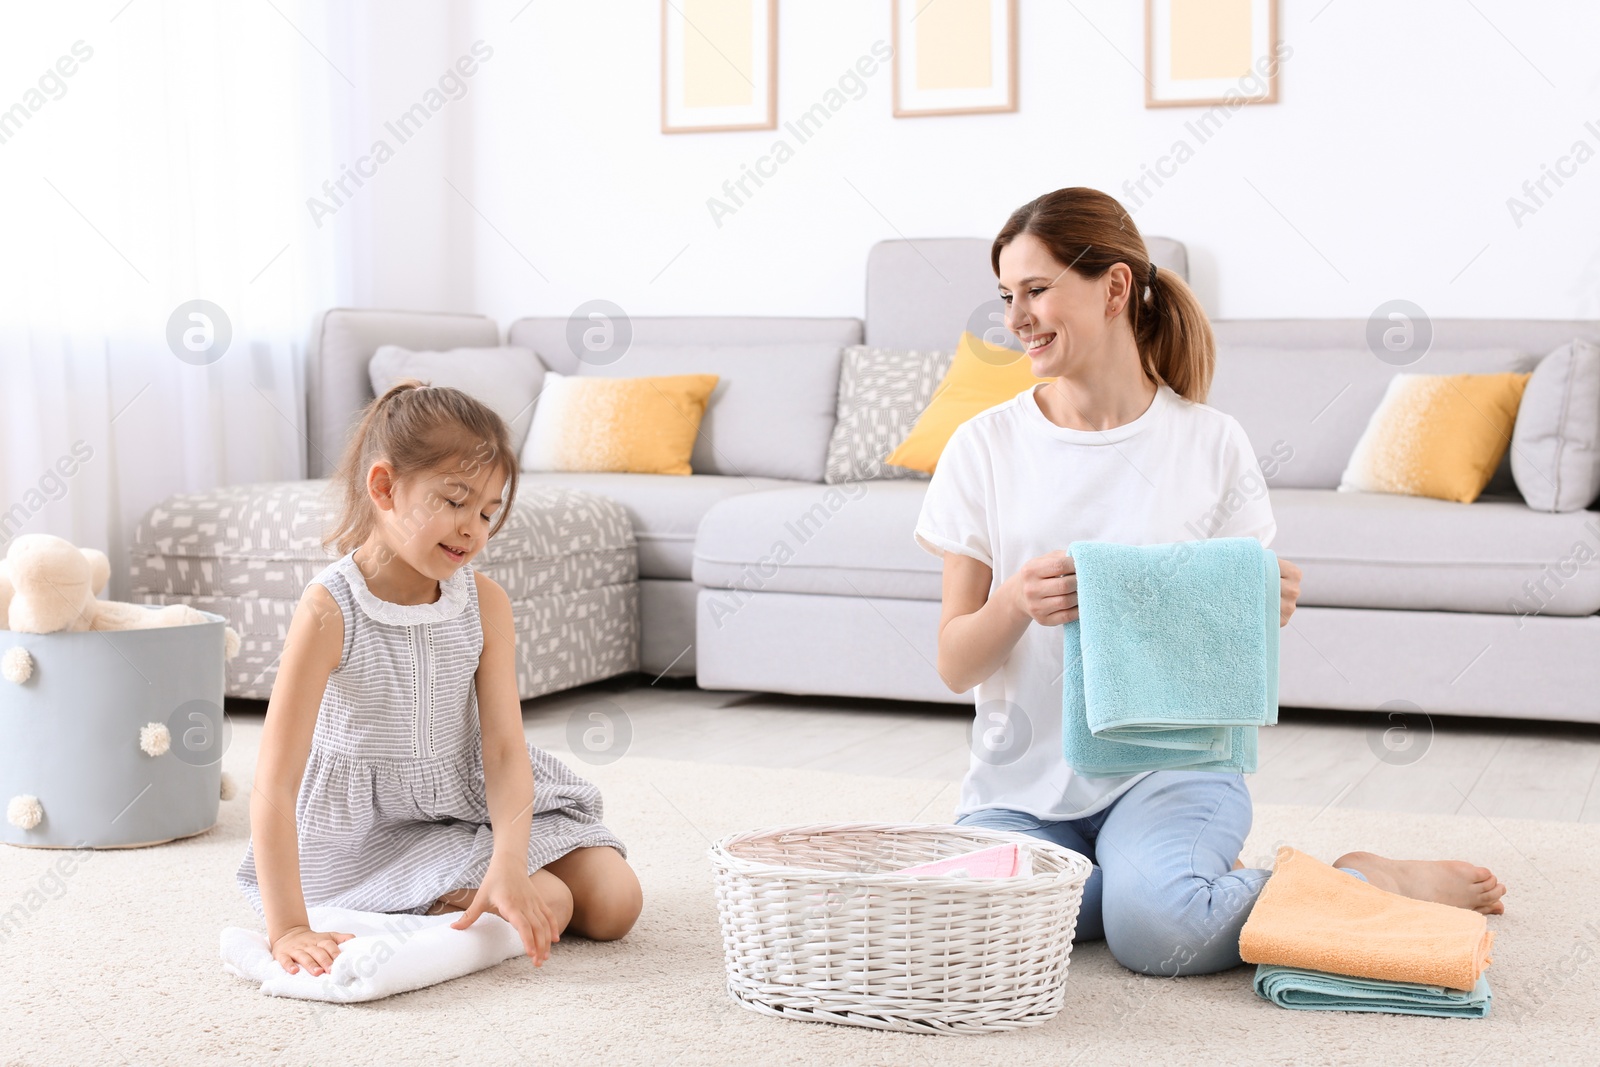 Photo of Housewife with daughter folding freshly washed towels in room